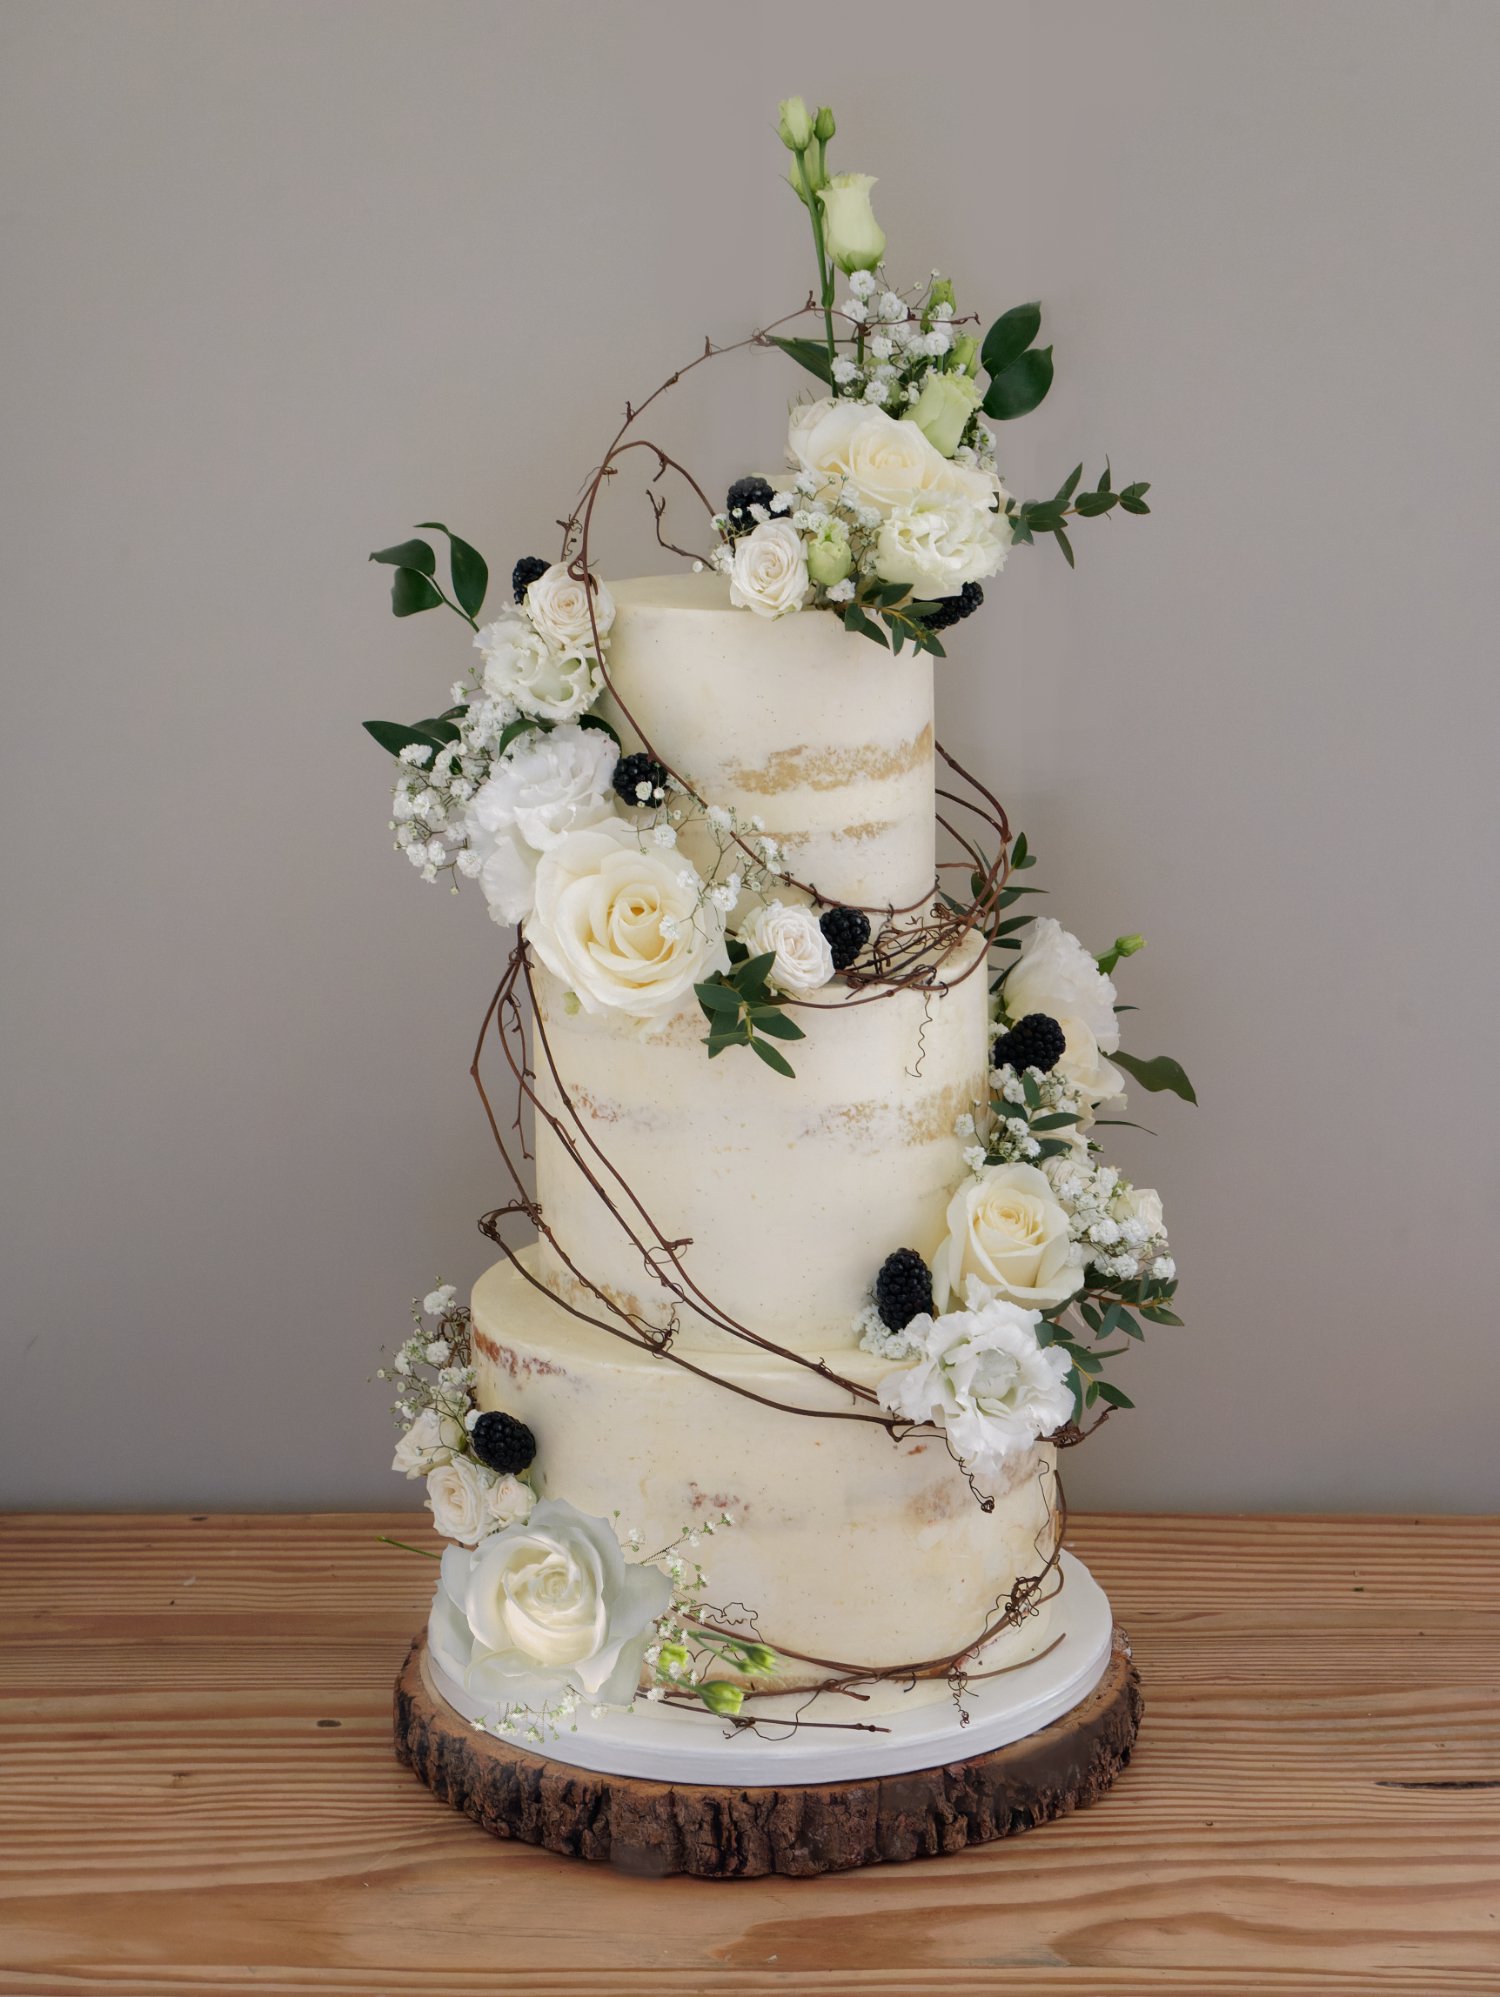 Semi-naked wedding cake with vines and blackberries.
Wedding cake with roses
Wedding cake